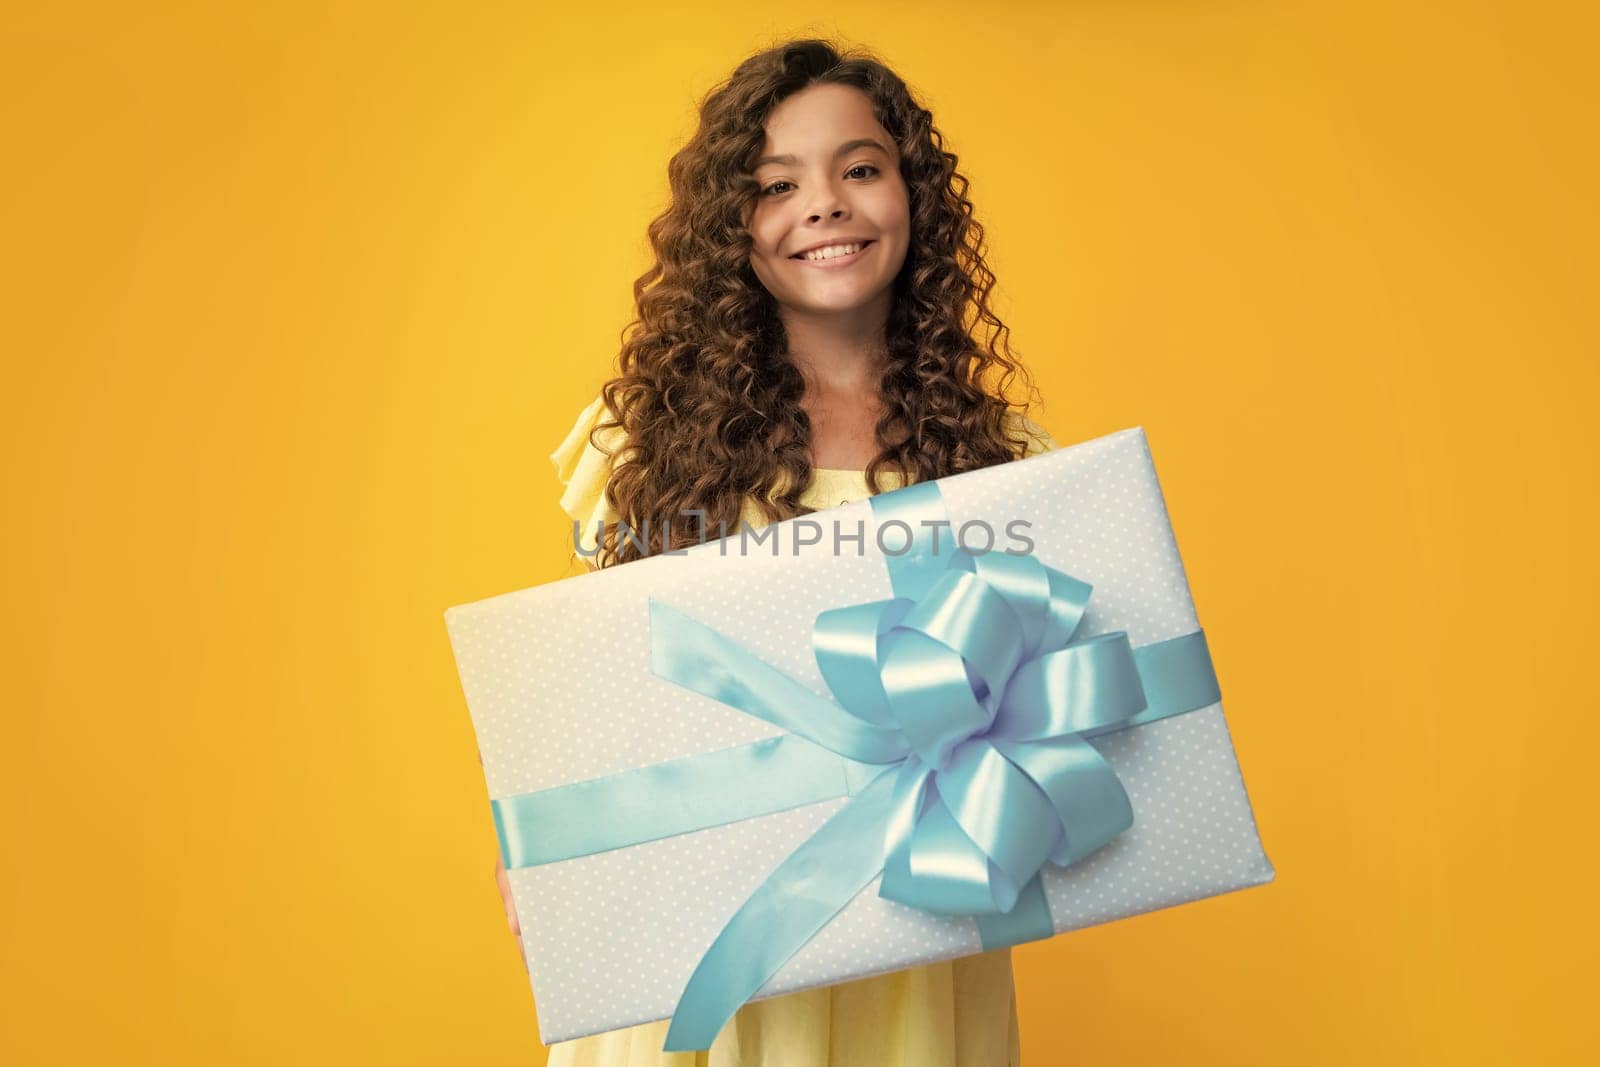 Happy teenager portrait. Child with gift present box on isolated background. Presents for birthday, Valentines day, New Year or Christmas. Smiling girl. by RedFoxStudio